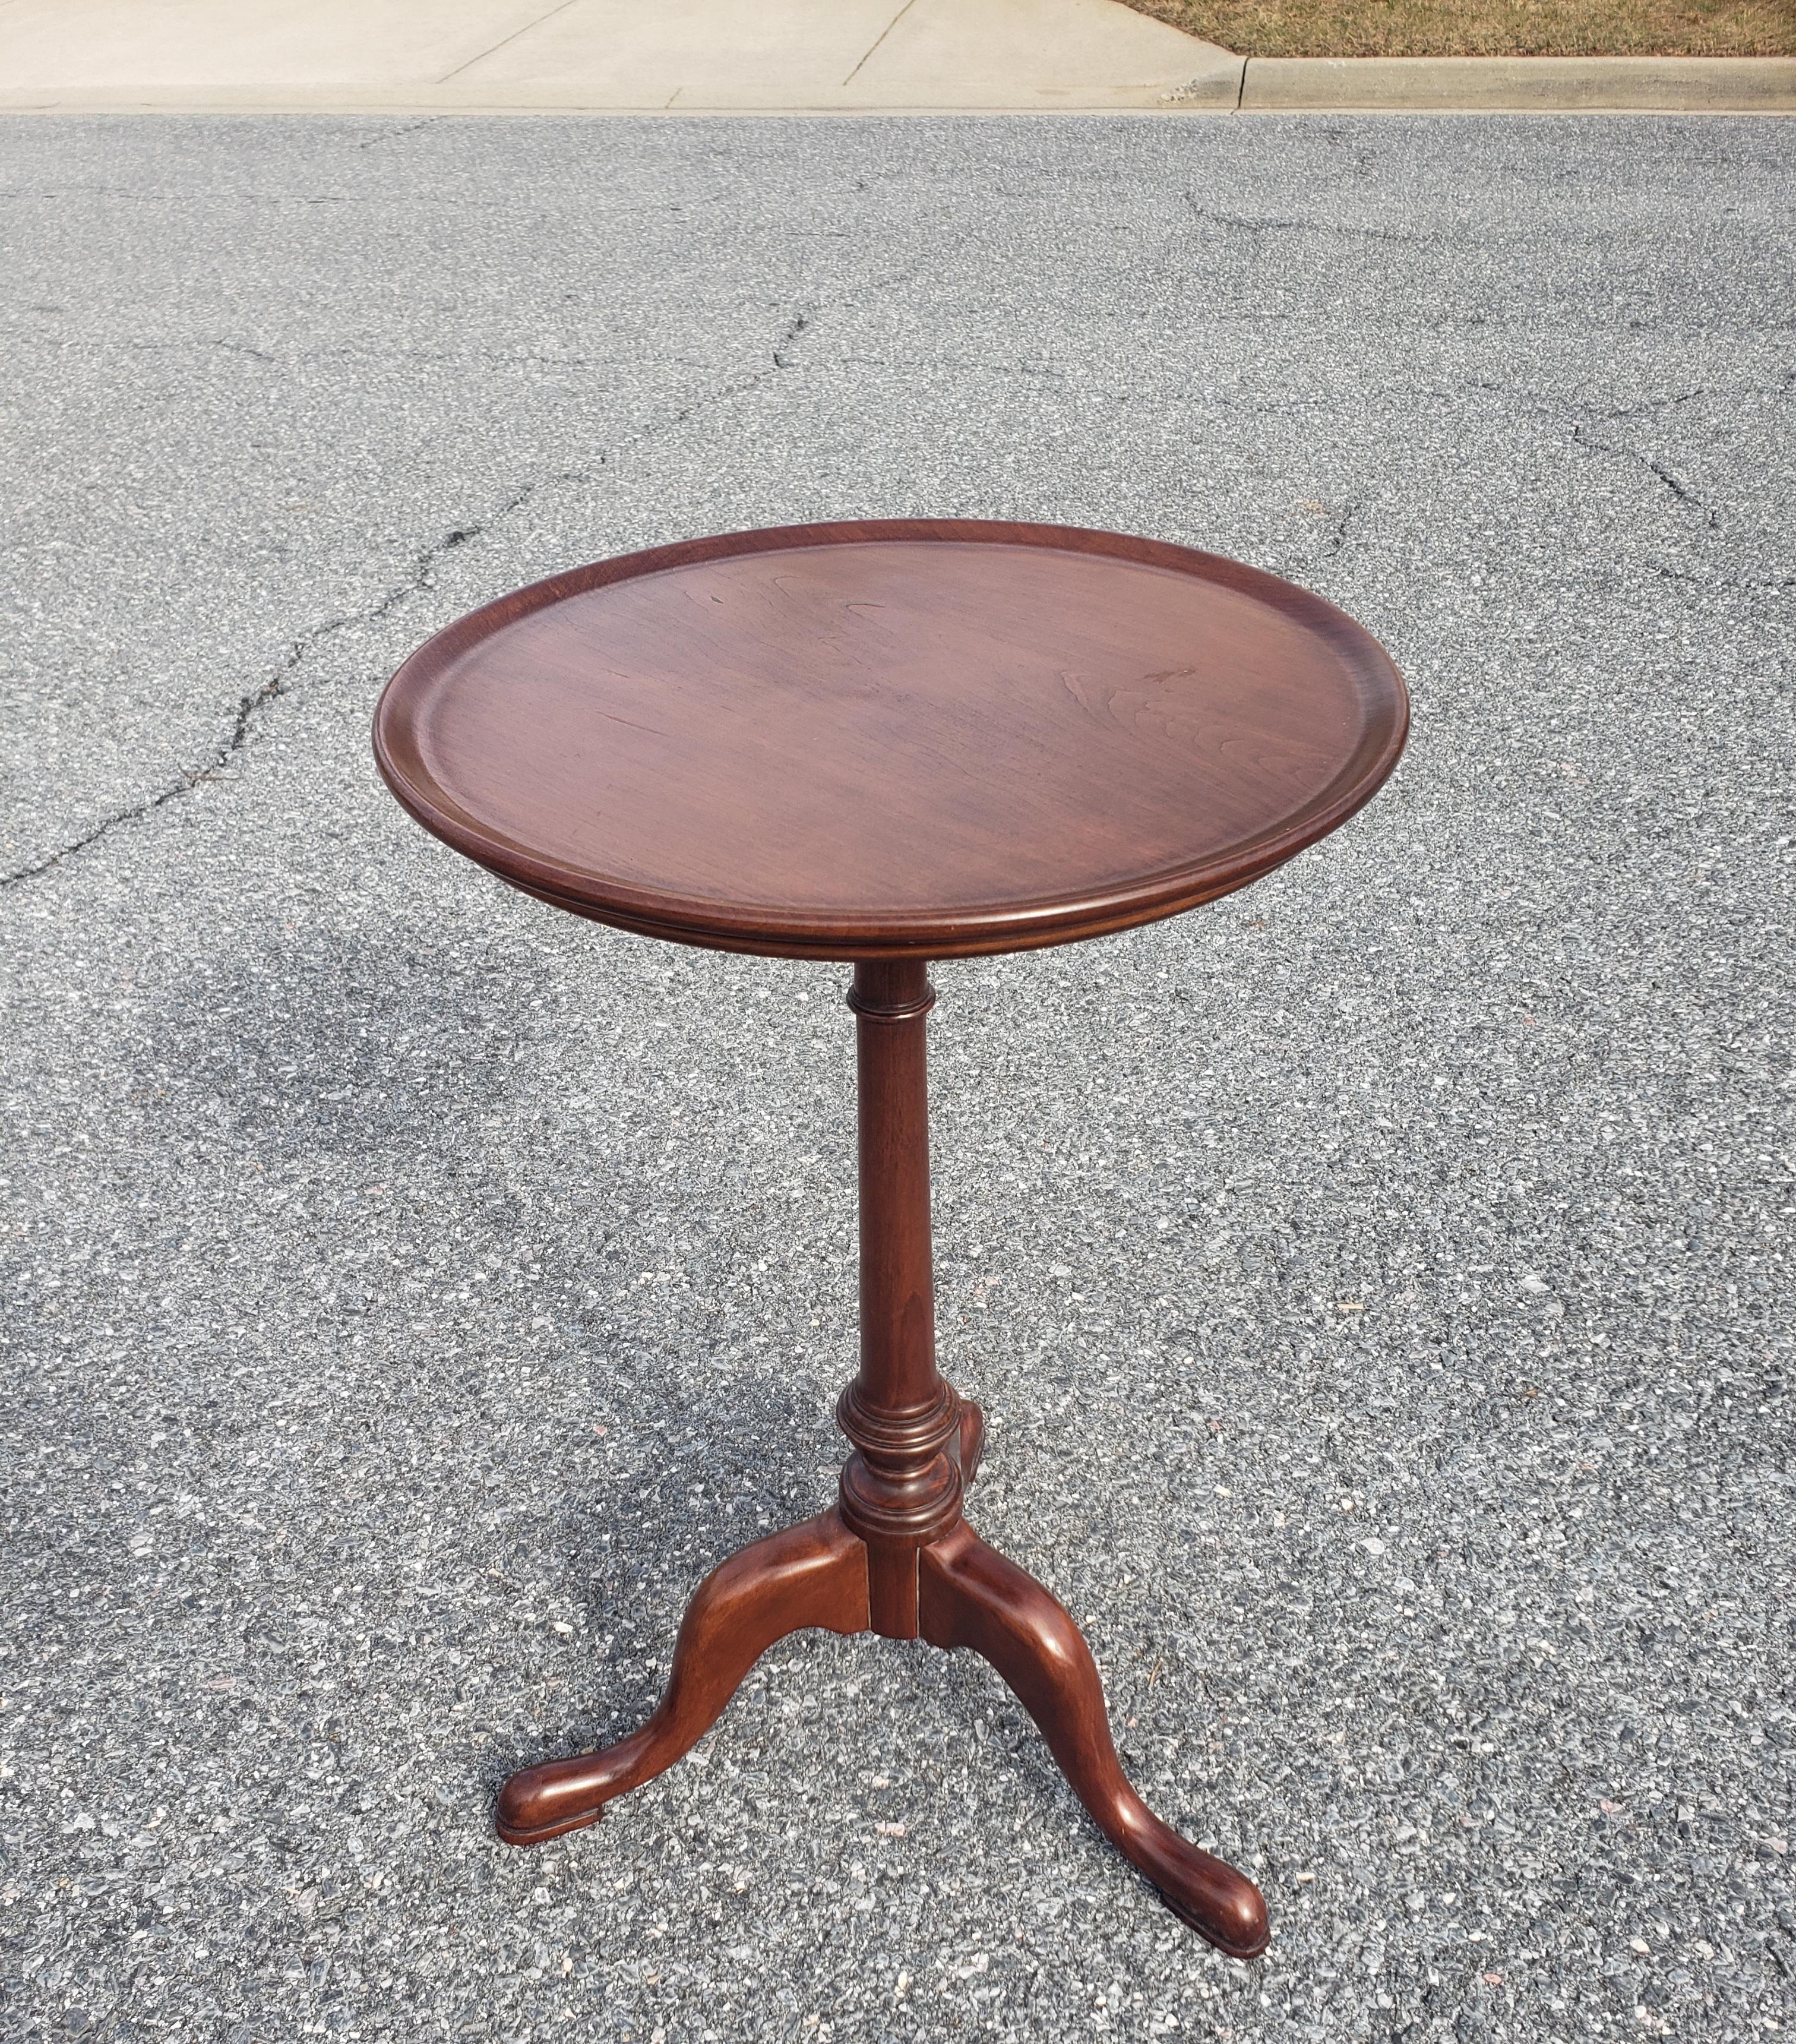 Mid-Century Modern 1970s George White Handcrafted for the Barley Collection Cherry Candle Stand For Sale